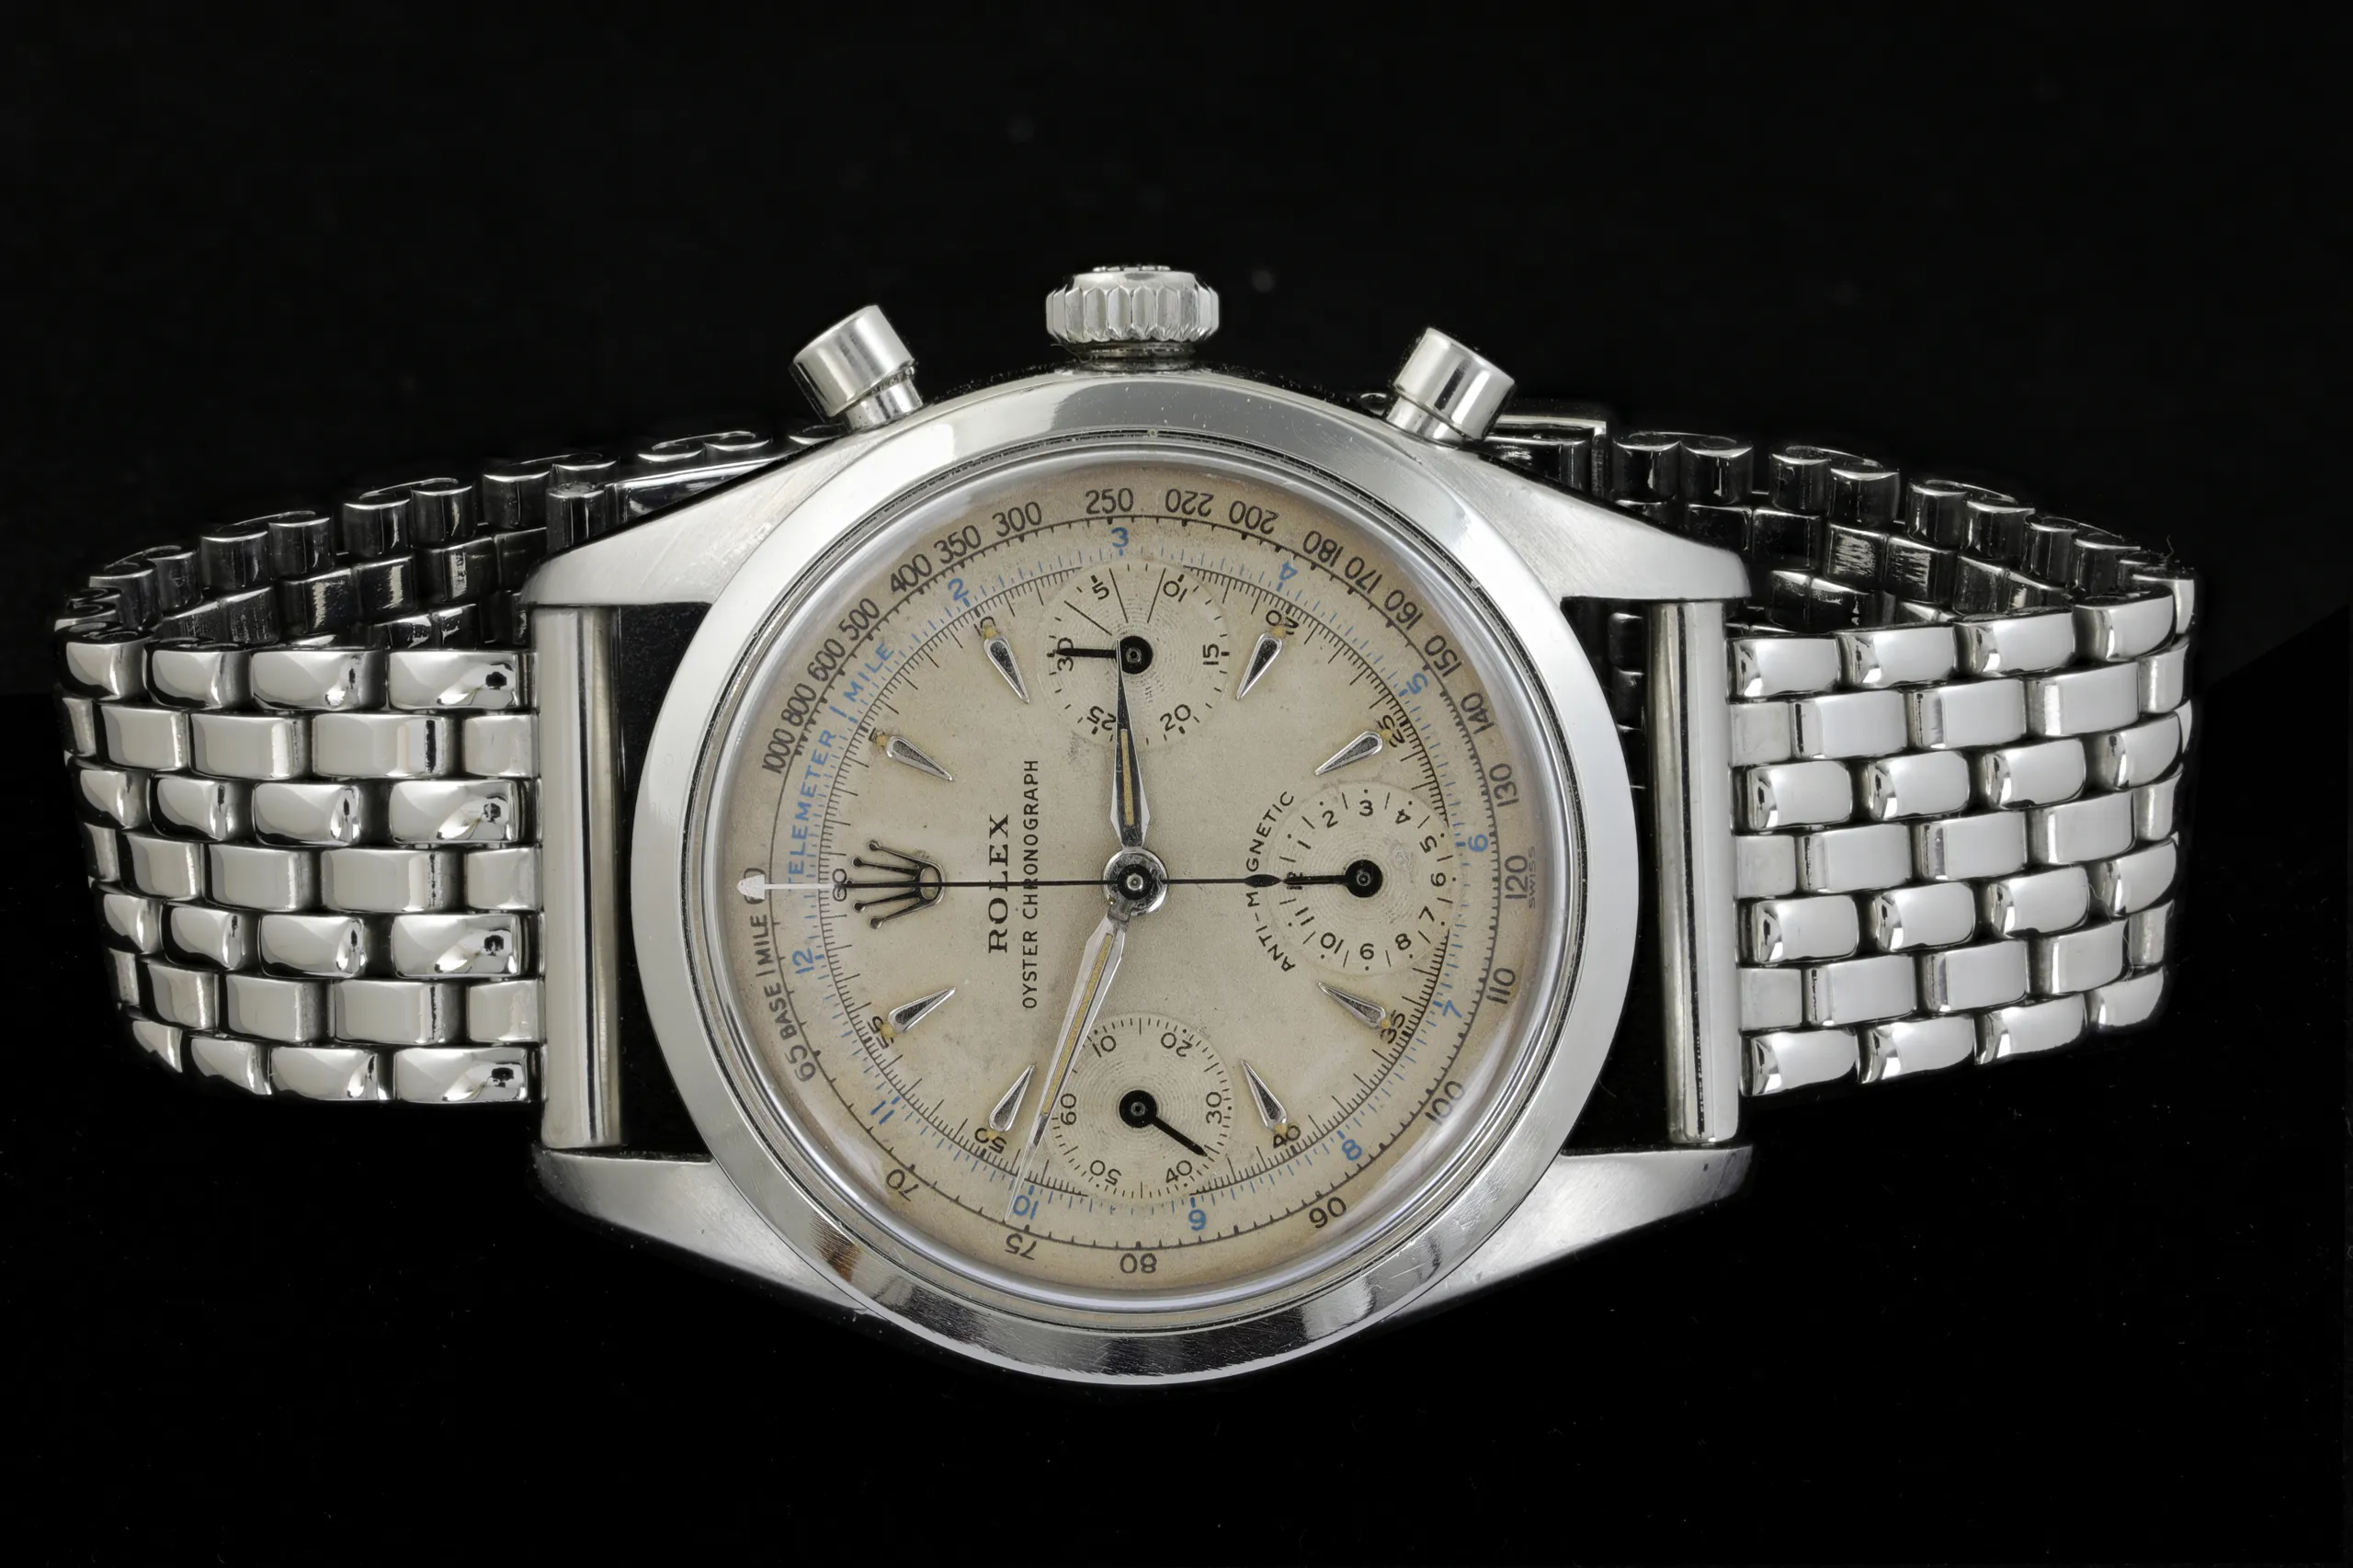 Rolex Chronograph 6234 Stainless steel